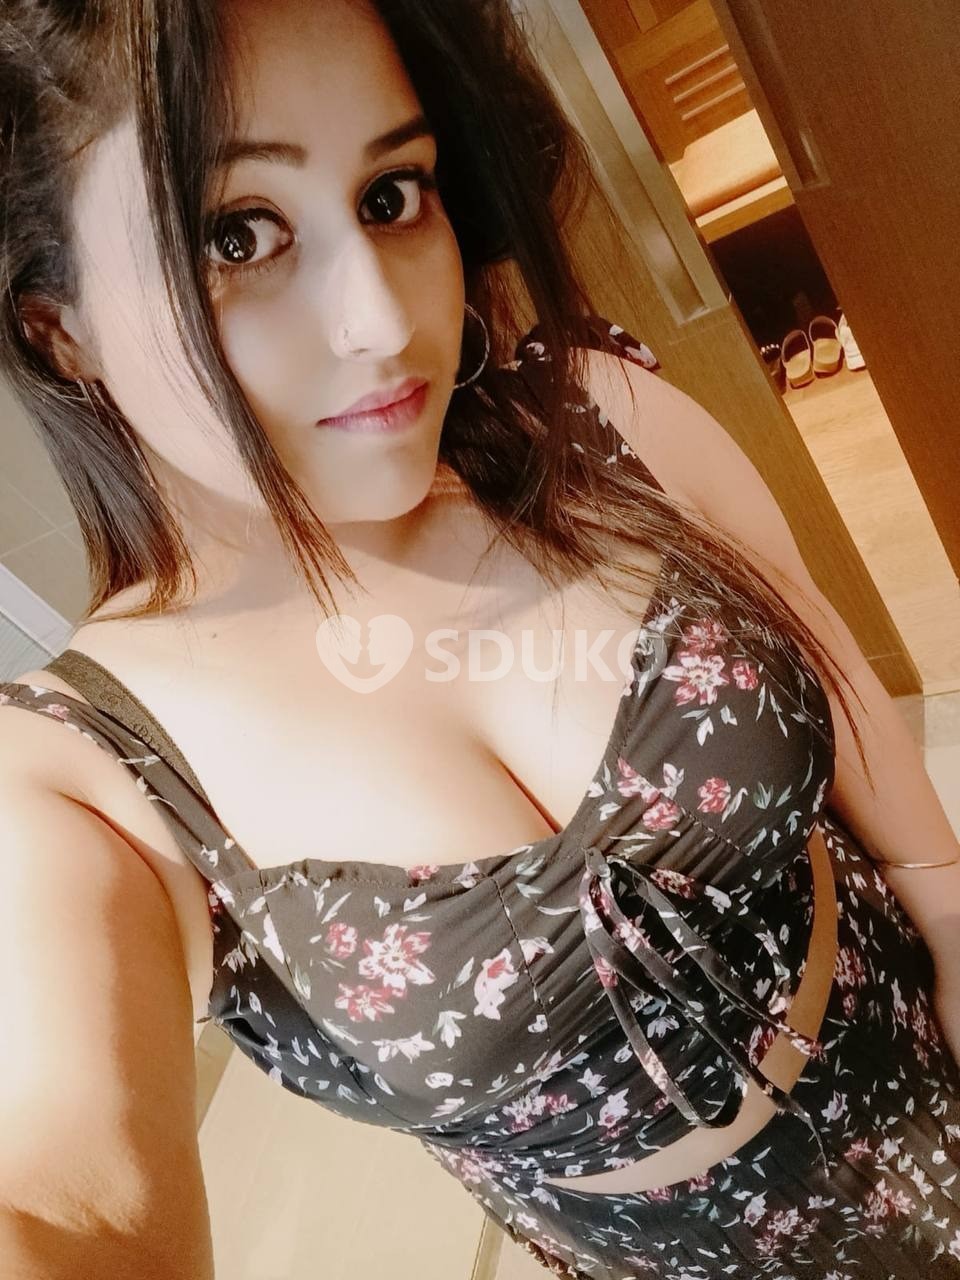 VASTRAPUR....🥰 HOME AND HOTEL SERVICE AVAILABLE FULL SAFE AND SECURE SERVICE AVAILABLE HETAL 21